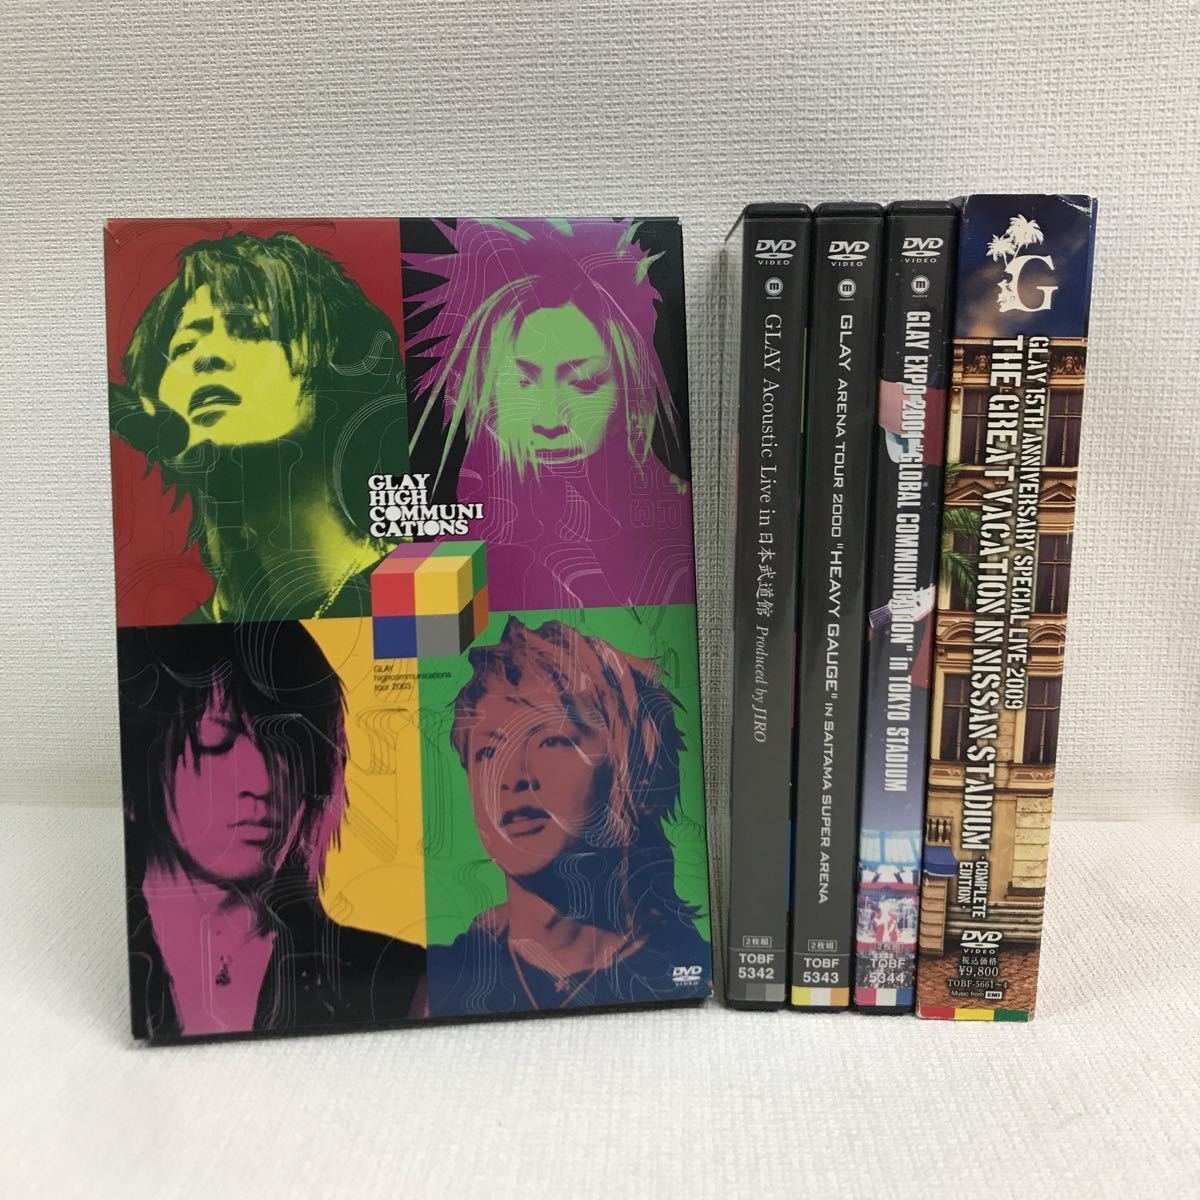 Y0426A2 まとめ★GLAY DVD 5巻セット 東芝EMI ライブ ツアー / HIGHCOMMUNICATIONS 2003 Acoustic Live in 日本武道館 ARENA TOUR 2000 他_画像1